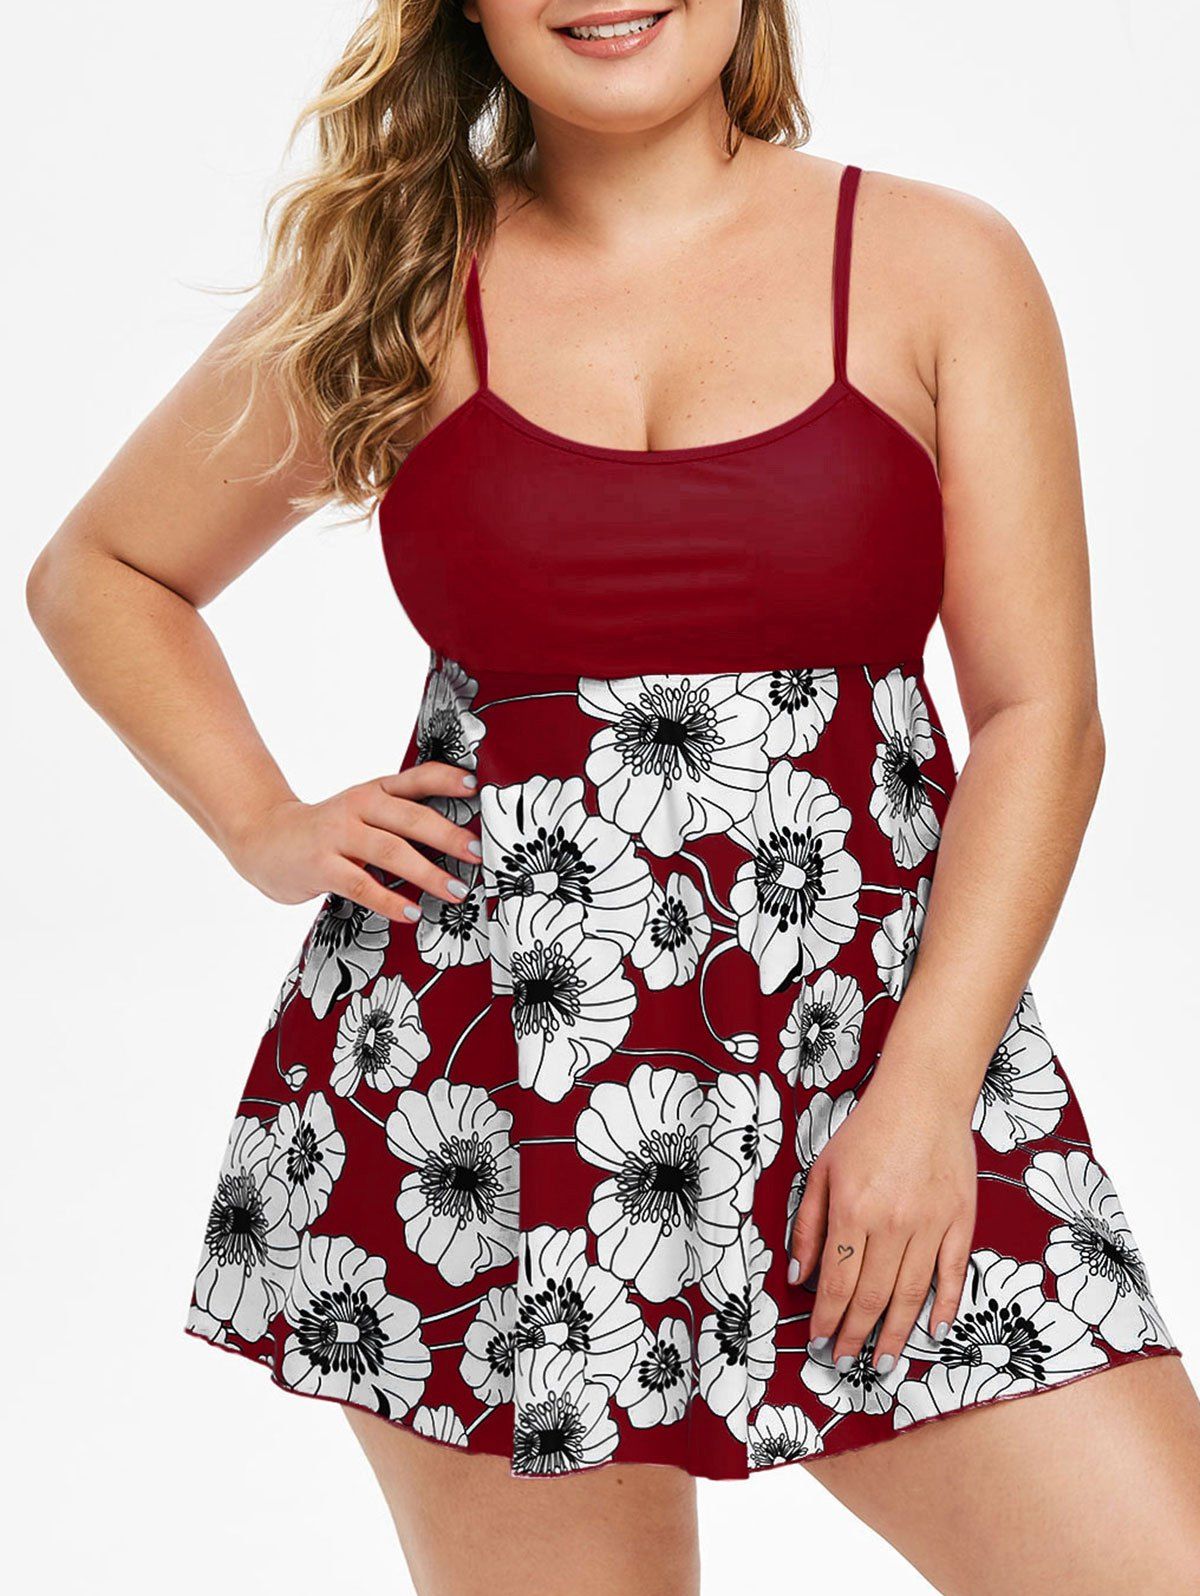 [35% OFF] 2021 Floral Contrast Plus Size Tankini Set In RED WINE ...